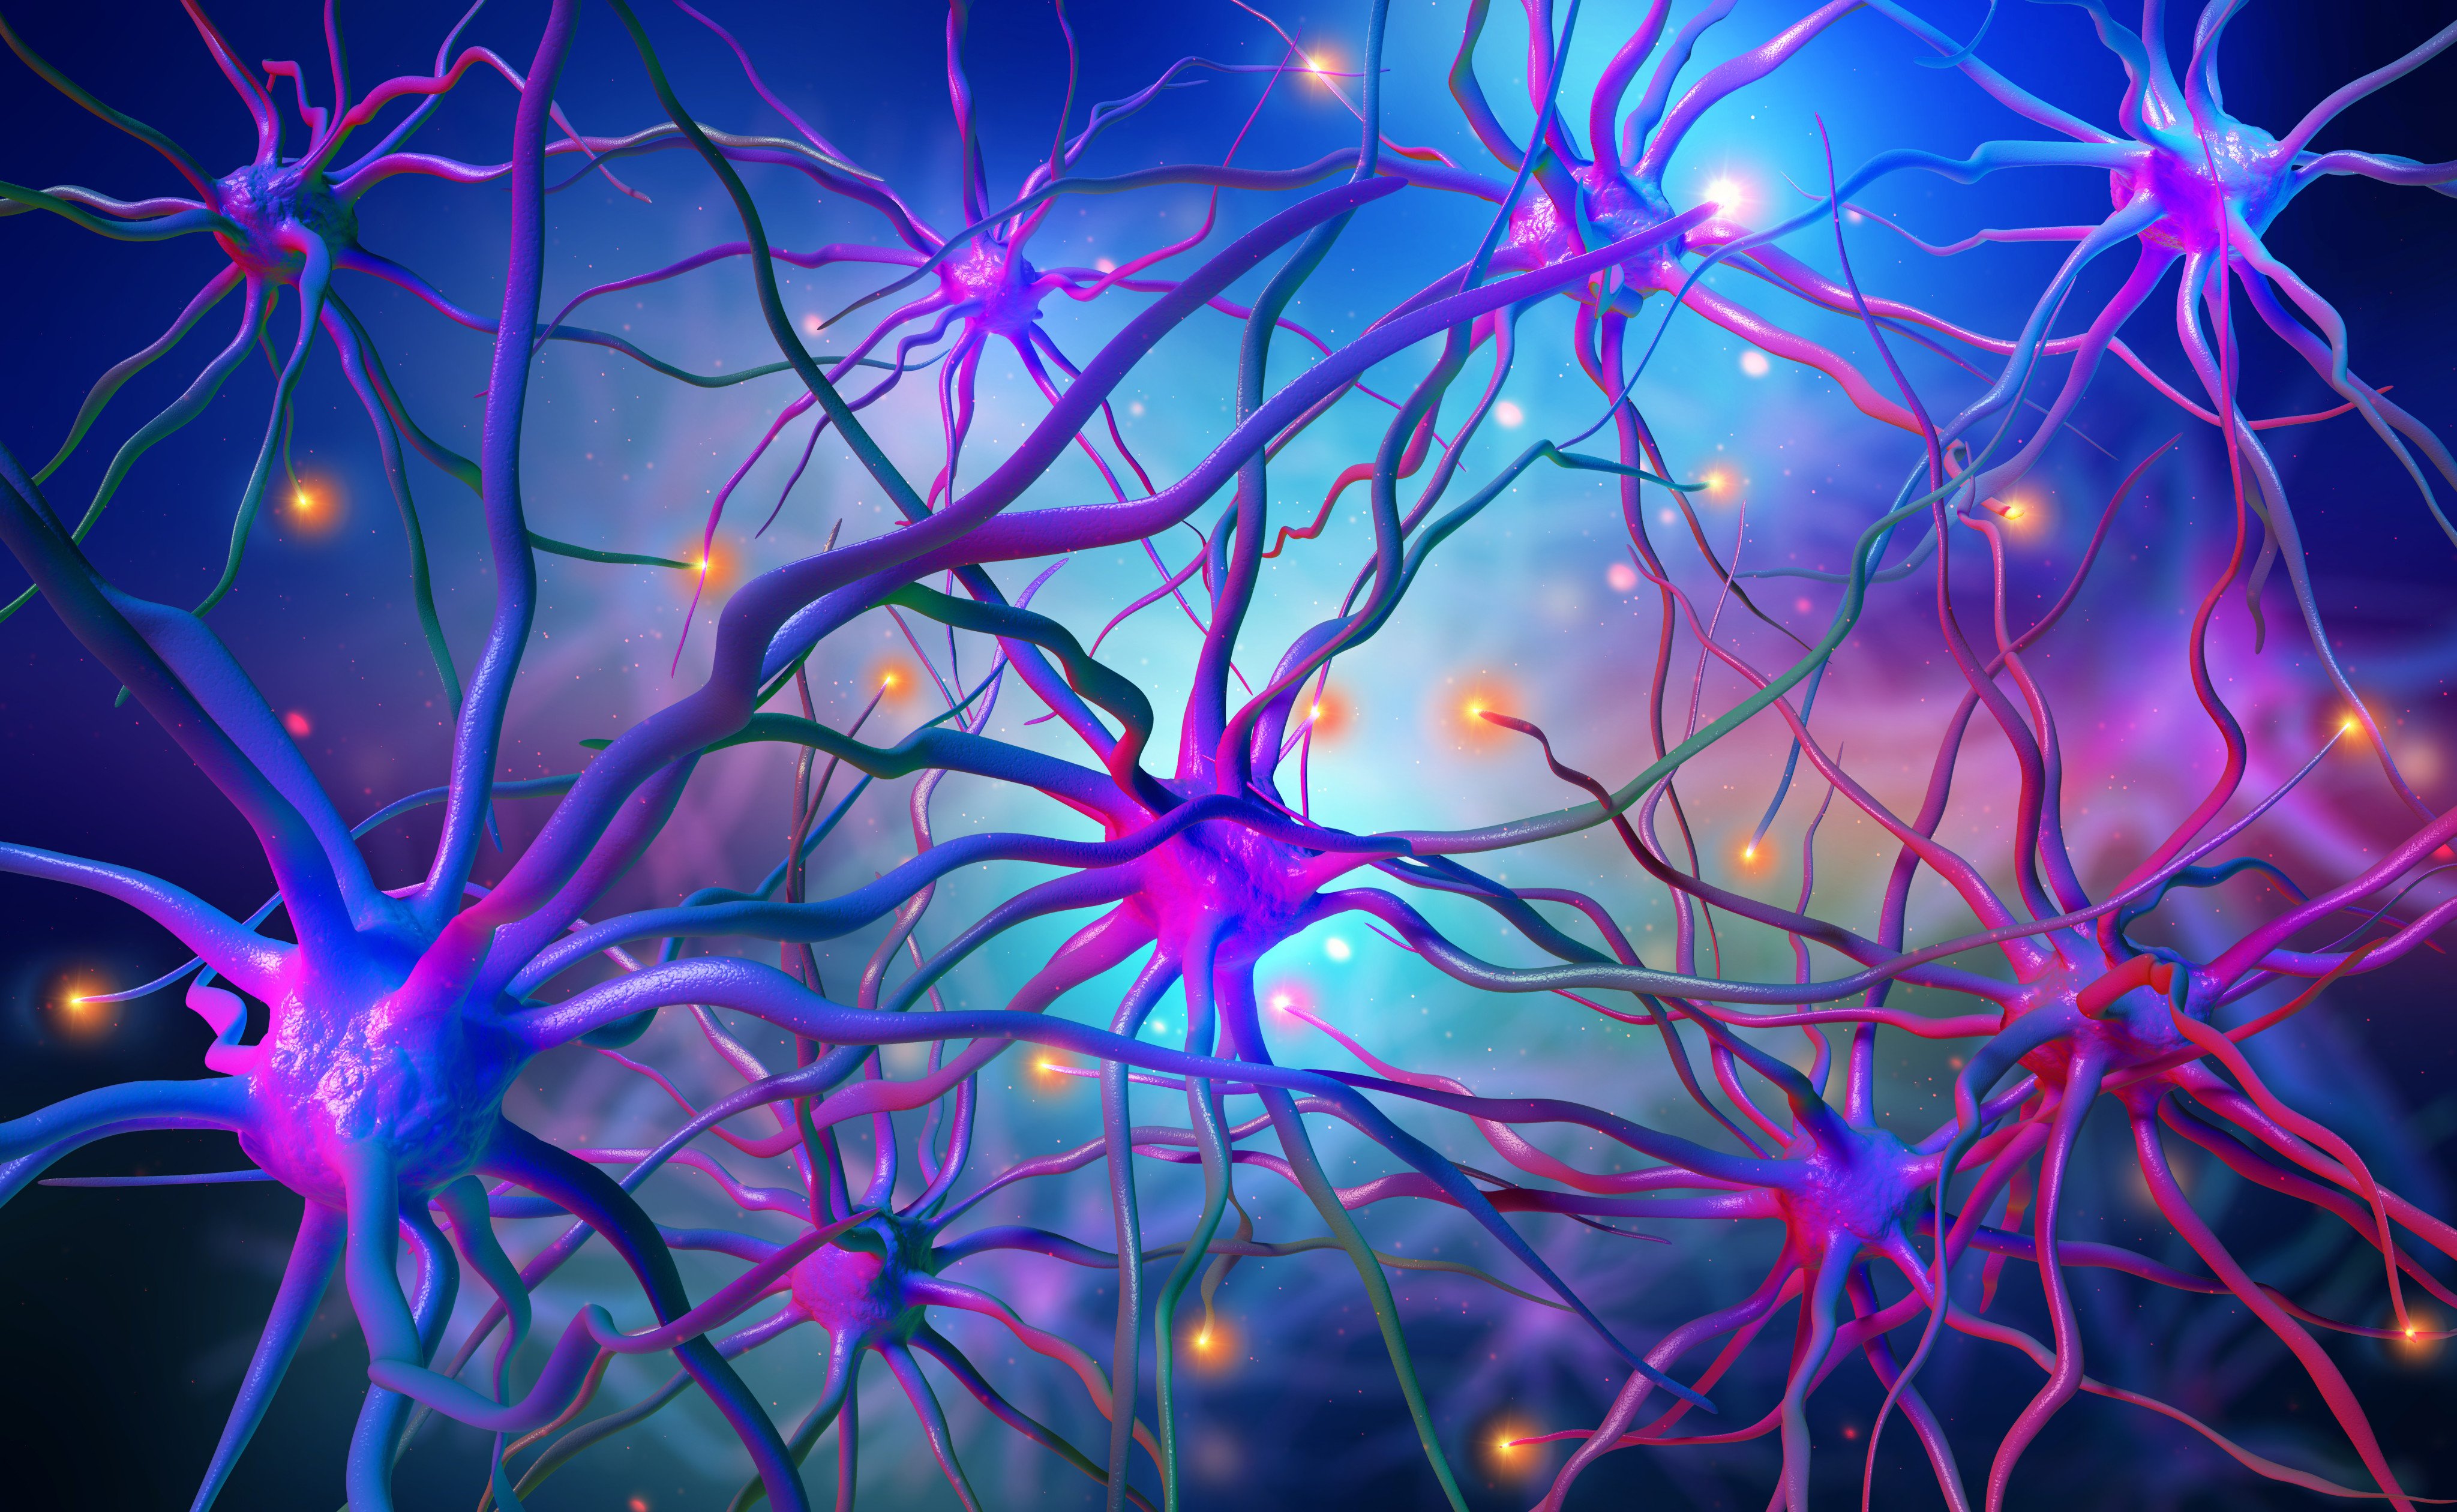 A research team in China has used a neural construct implant to boost neuron growth and functional injury repair allowing lab animals to gain back more limb motion after eight weeks. Image: Shutterstock